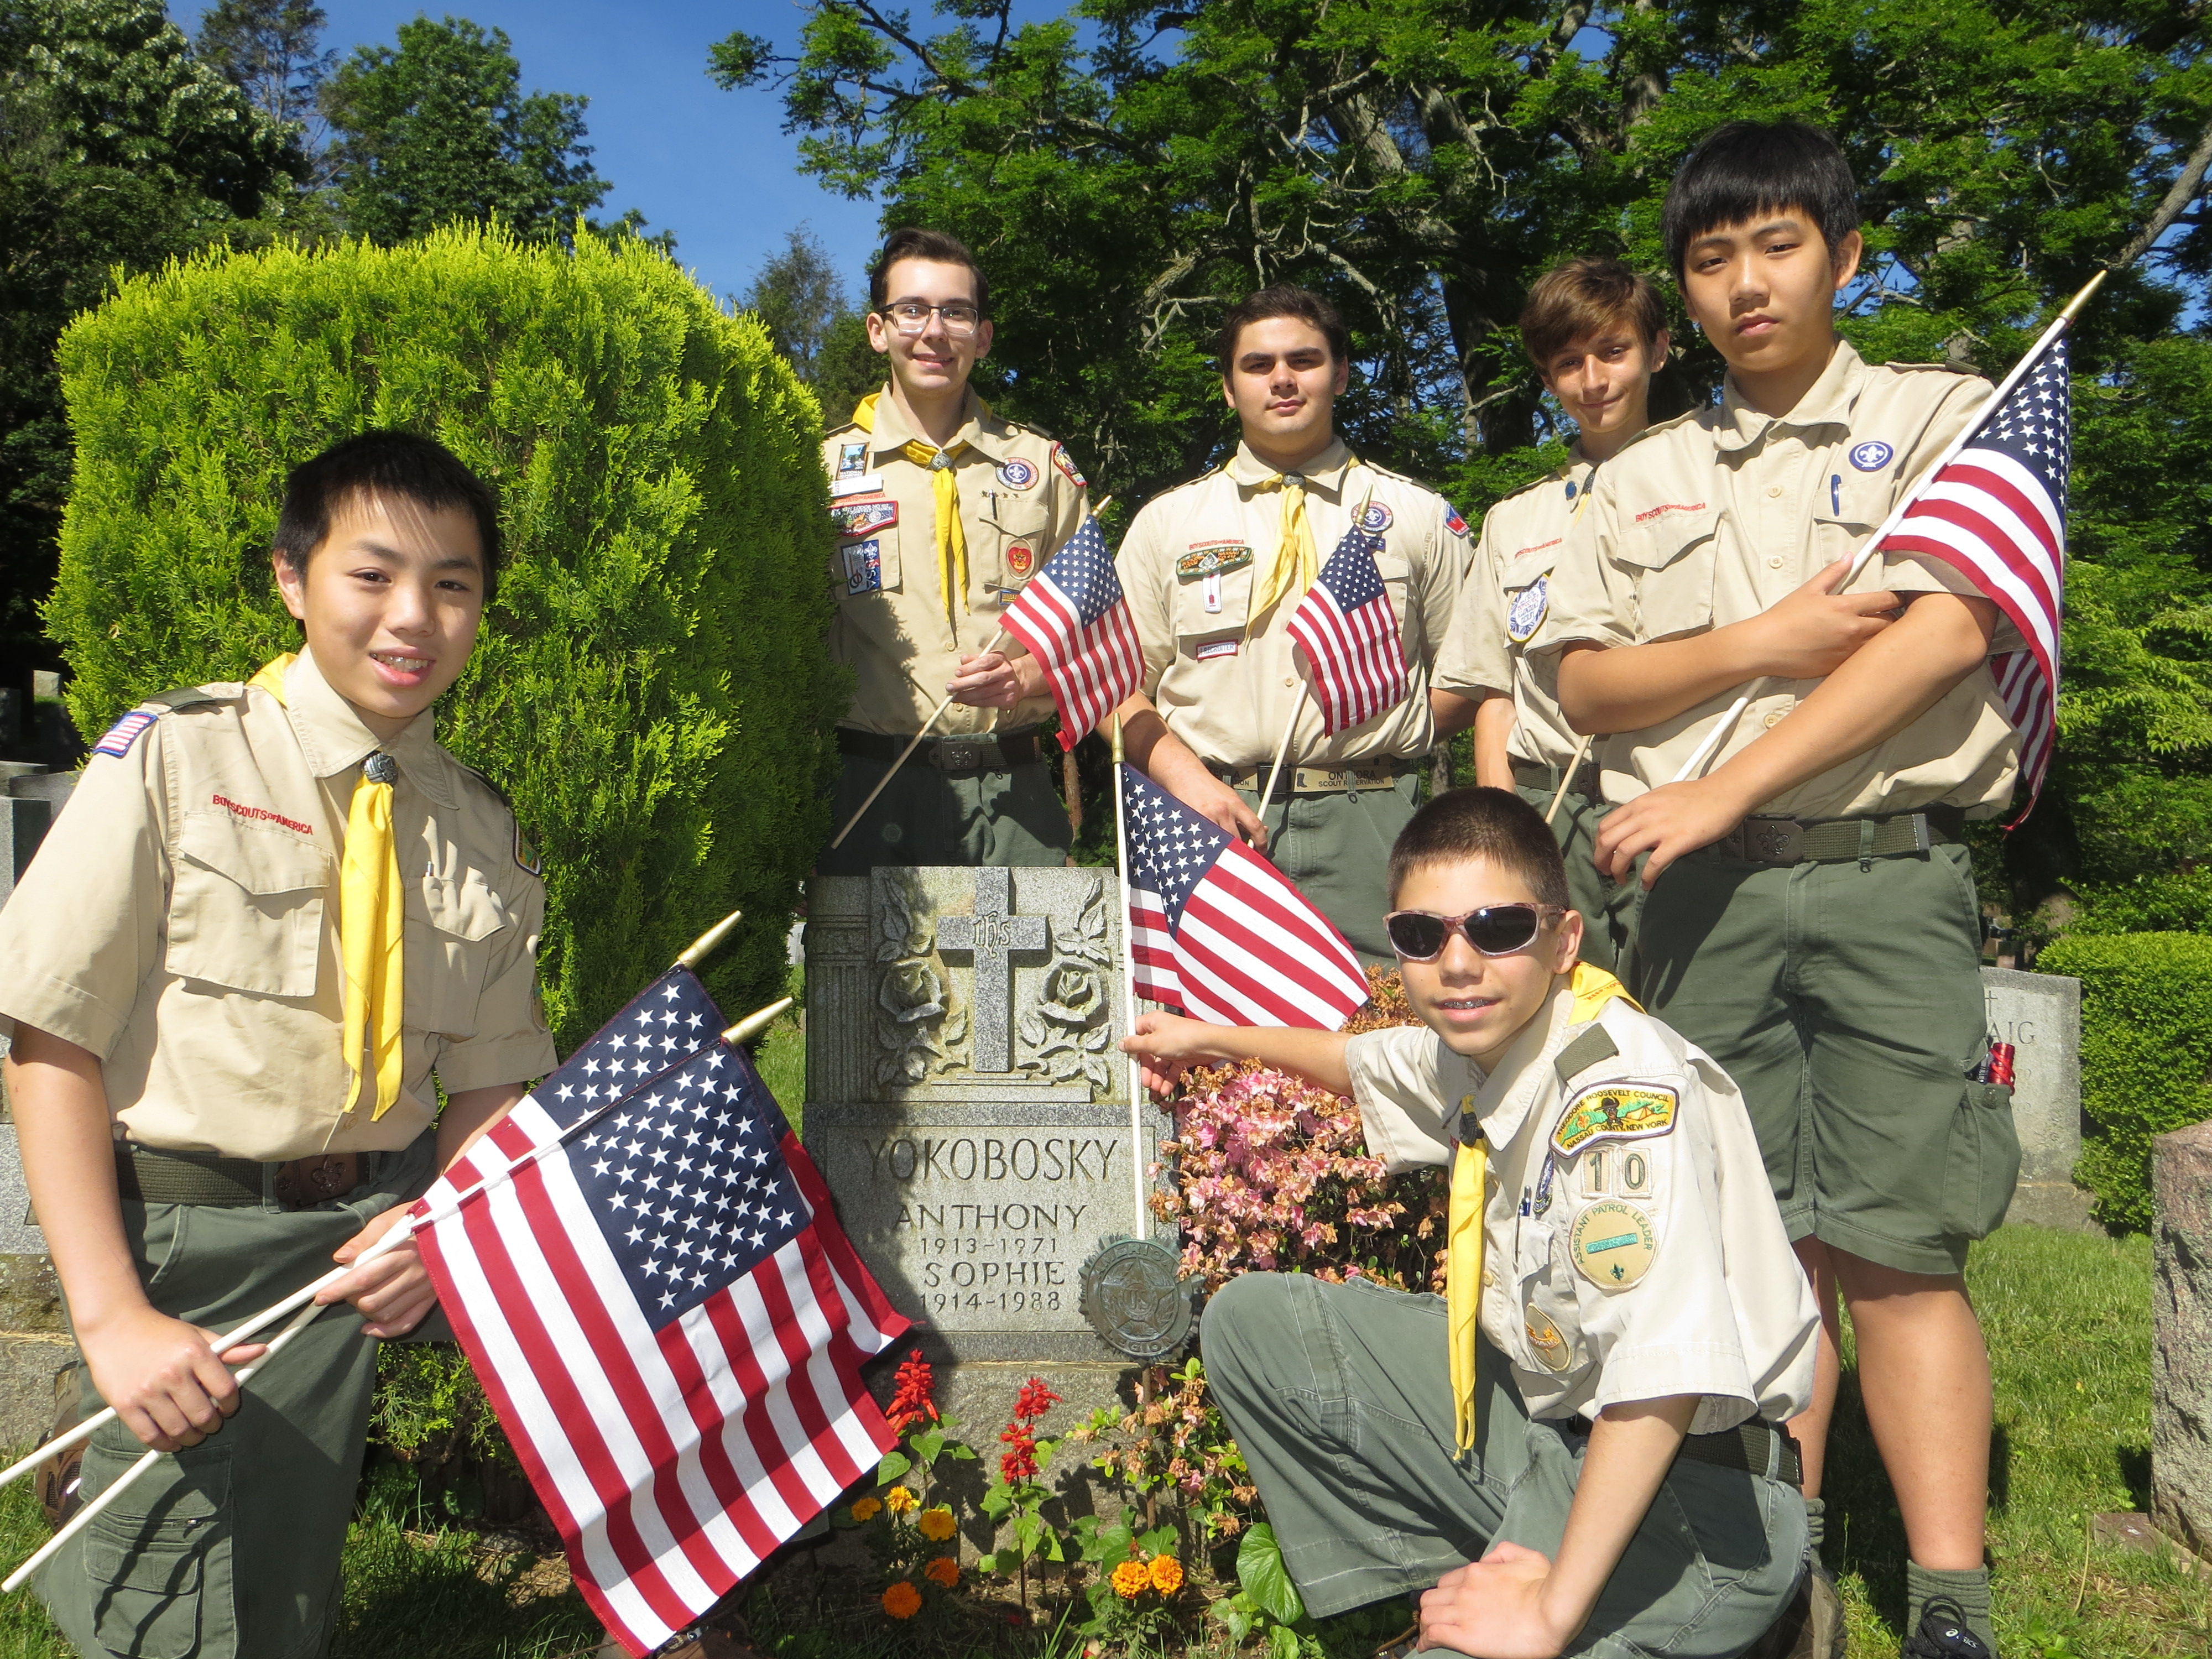 Every year on the Saturday before Memorial Day, Great Neck's Boy Scouts place flags on the graves of veterans. Many of these markers, however, have gone missing. (Photo courtesy of Donald Panetta)